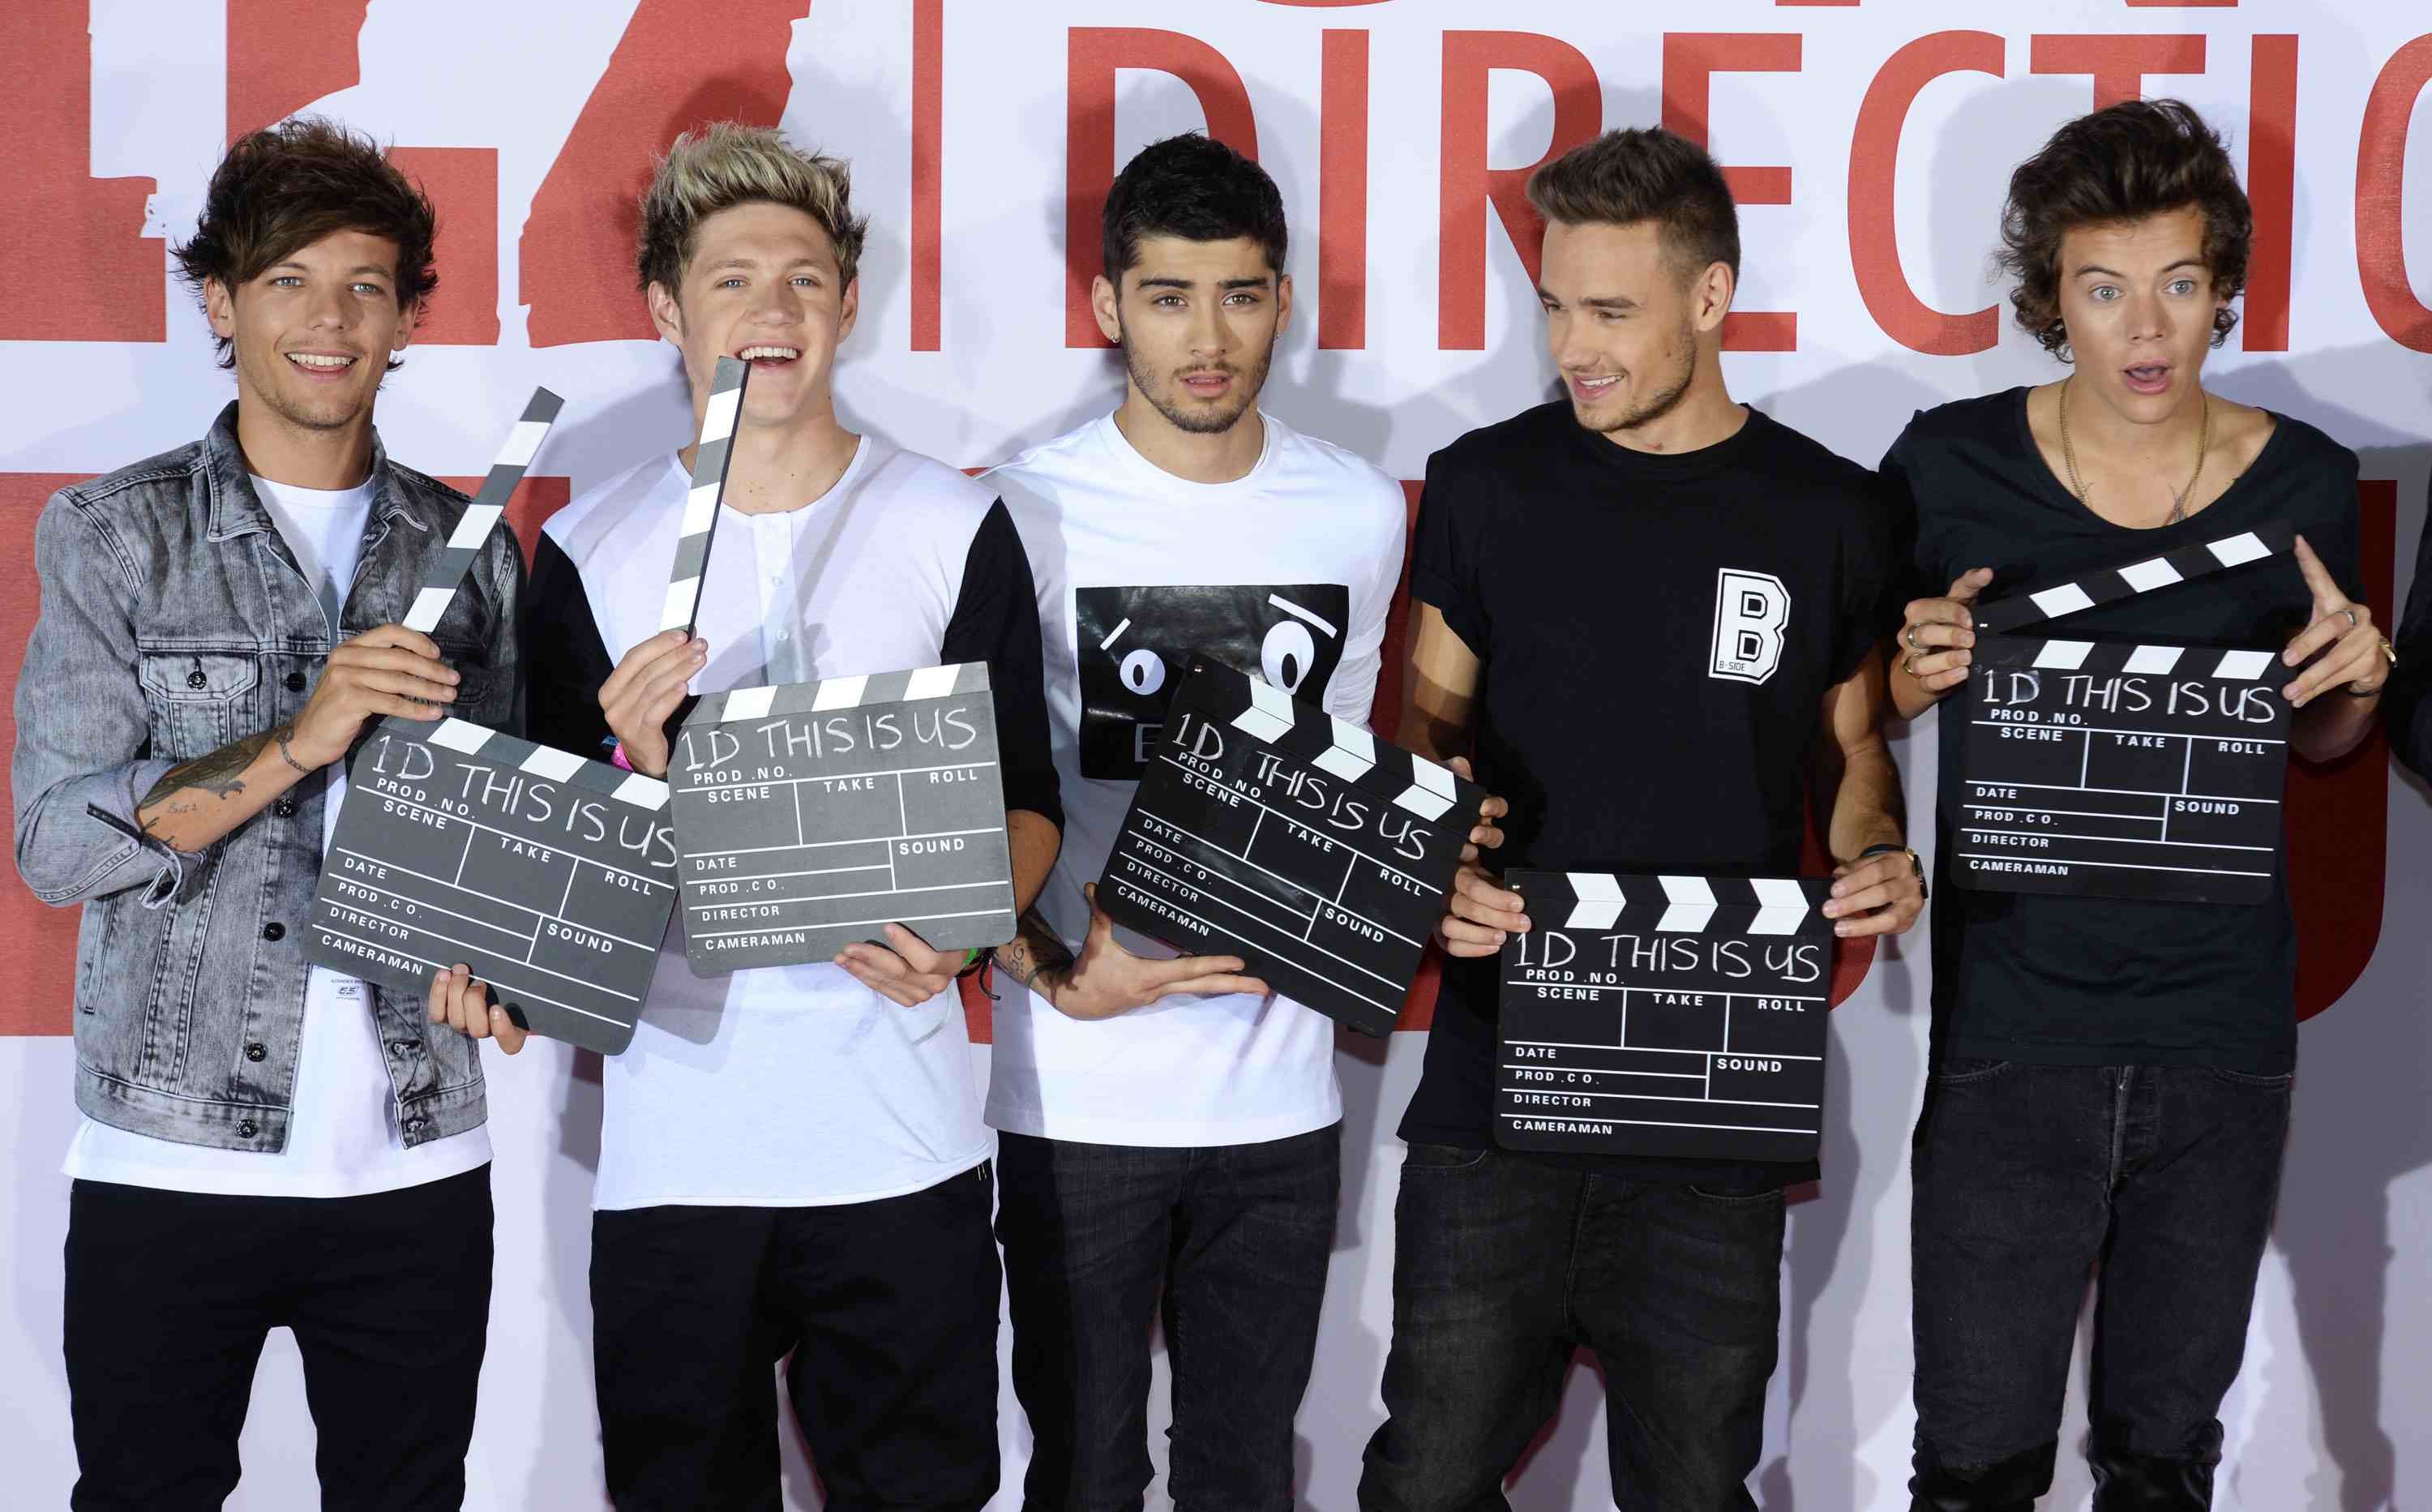 'One Direction – This Is Us' Photo Call And Press Conference